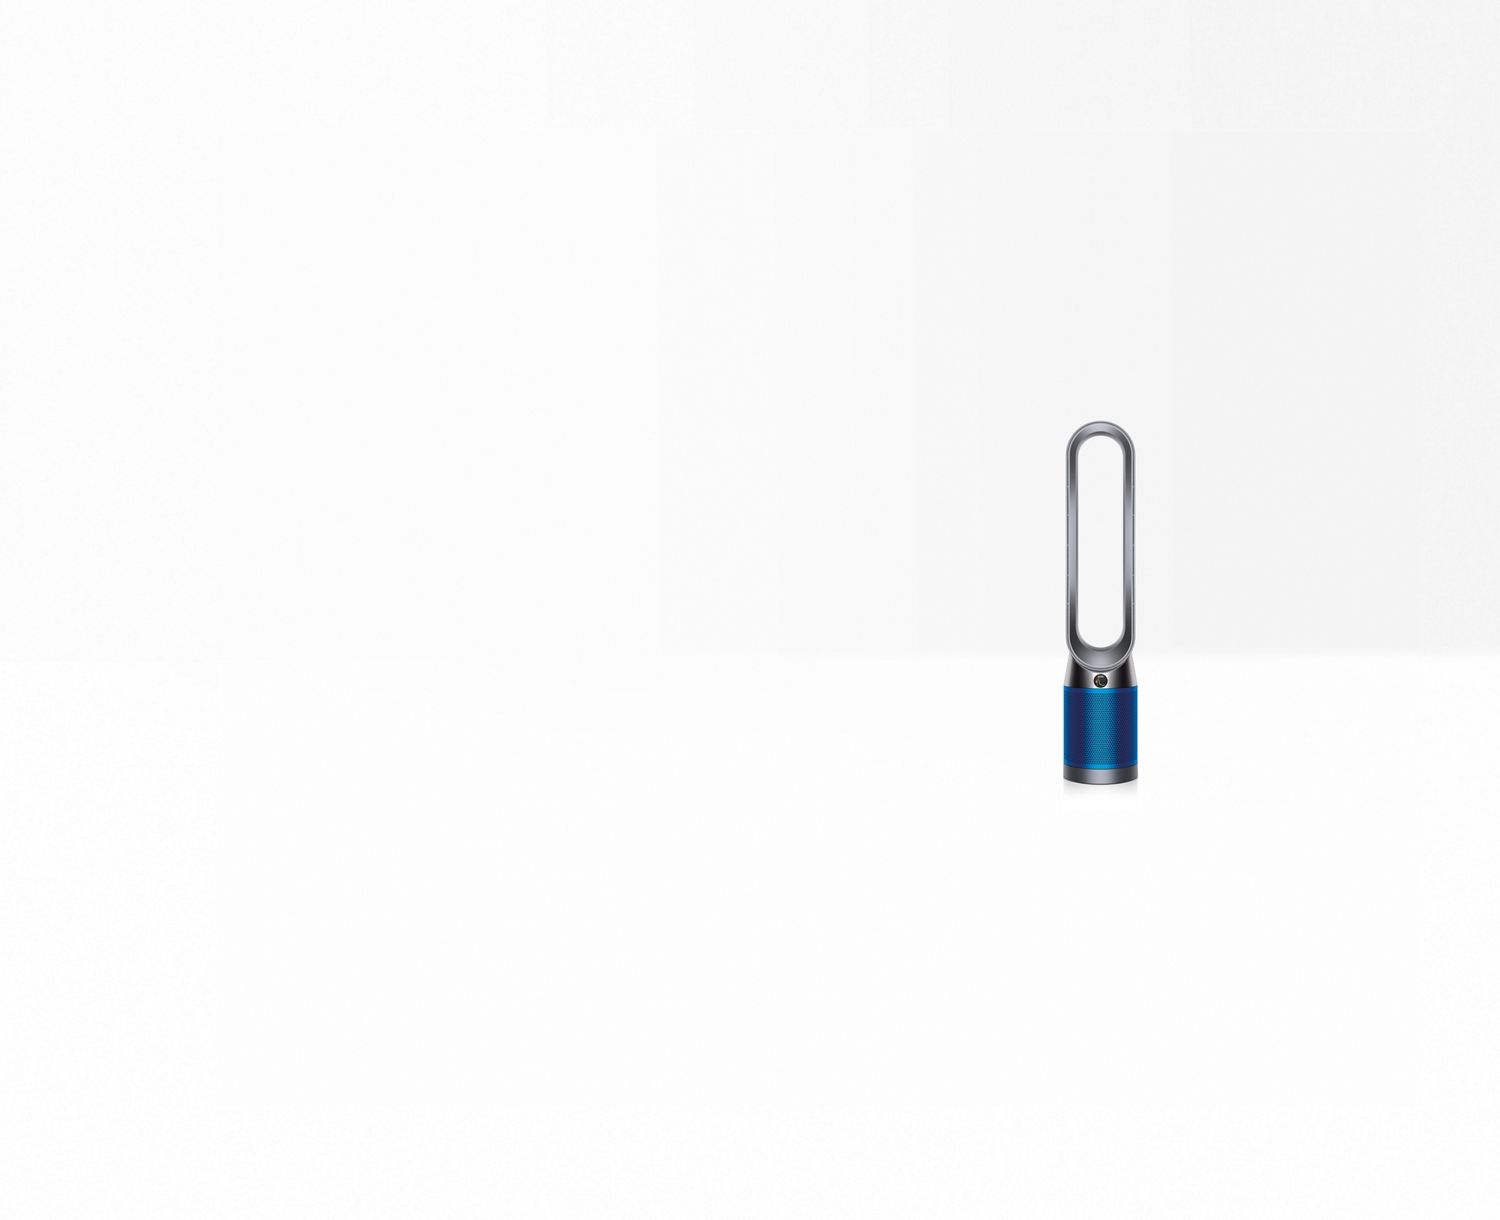 Dyson pure cool tower tp04